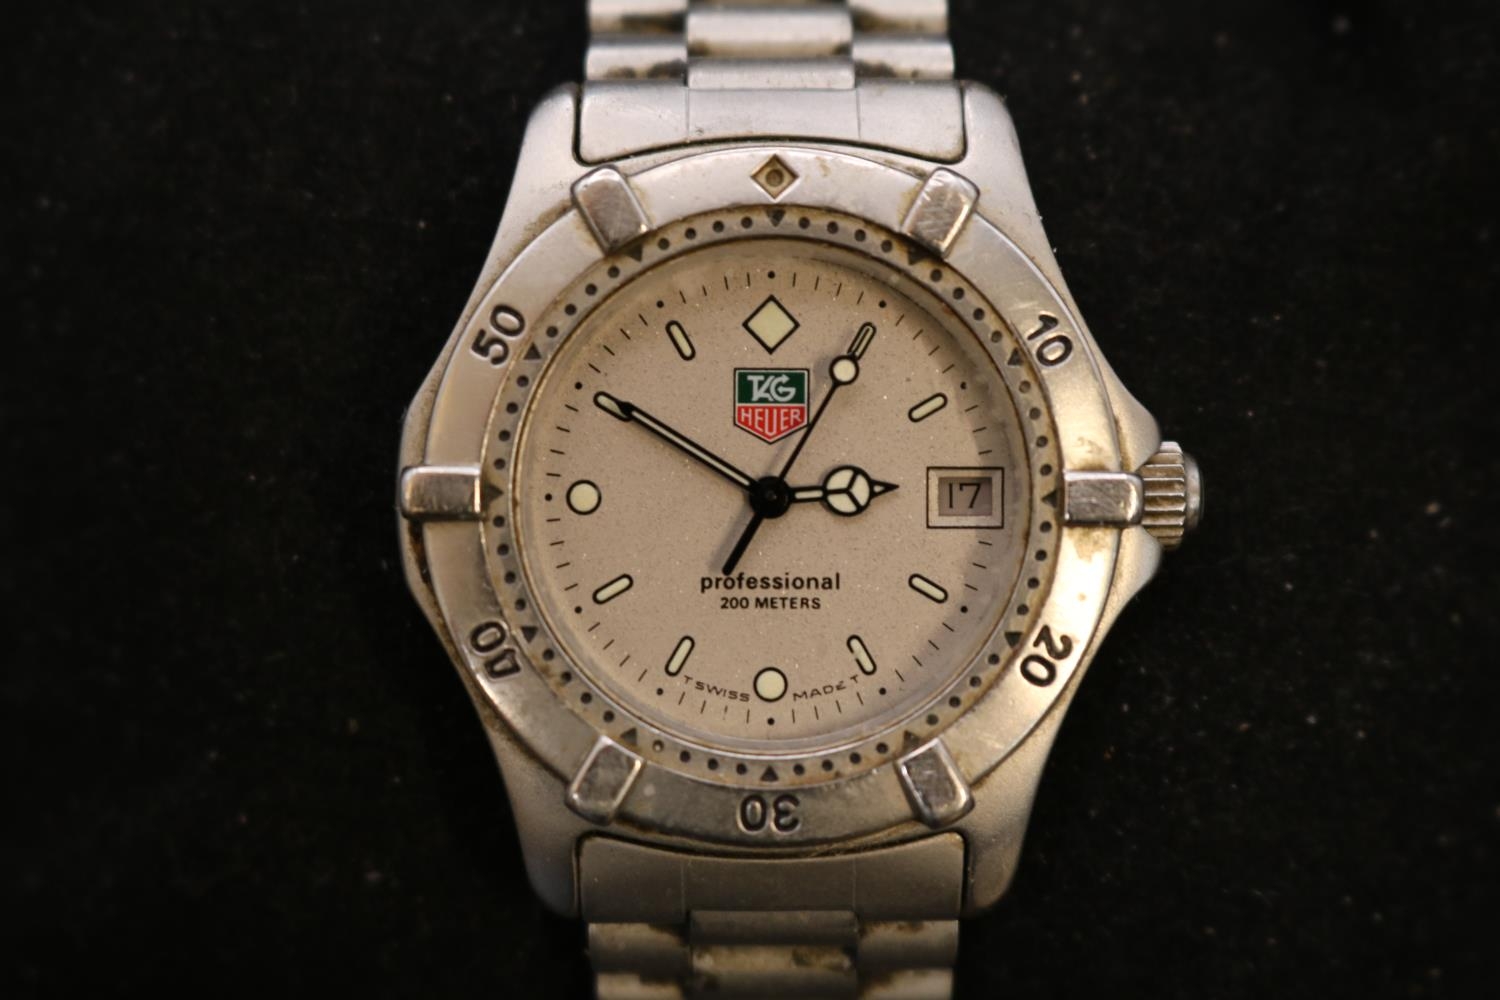 Tag Heuer Professional 200m Swiss quartz watch with date window & Silver coloured dial. 36mm case - Image 2 of 5